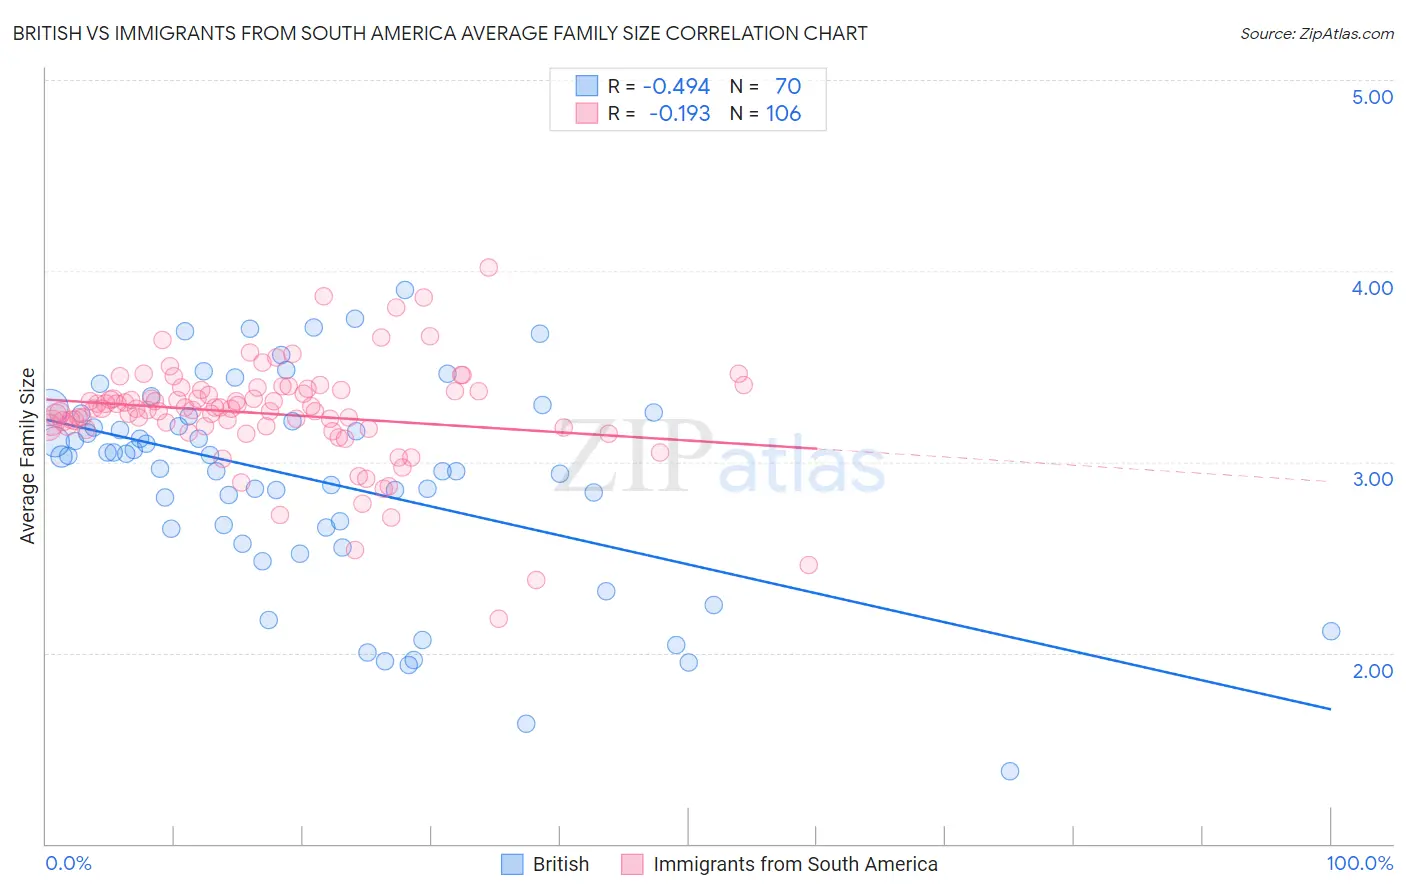 British vs Immigrants from South America Average Family Size